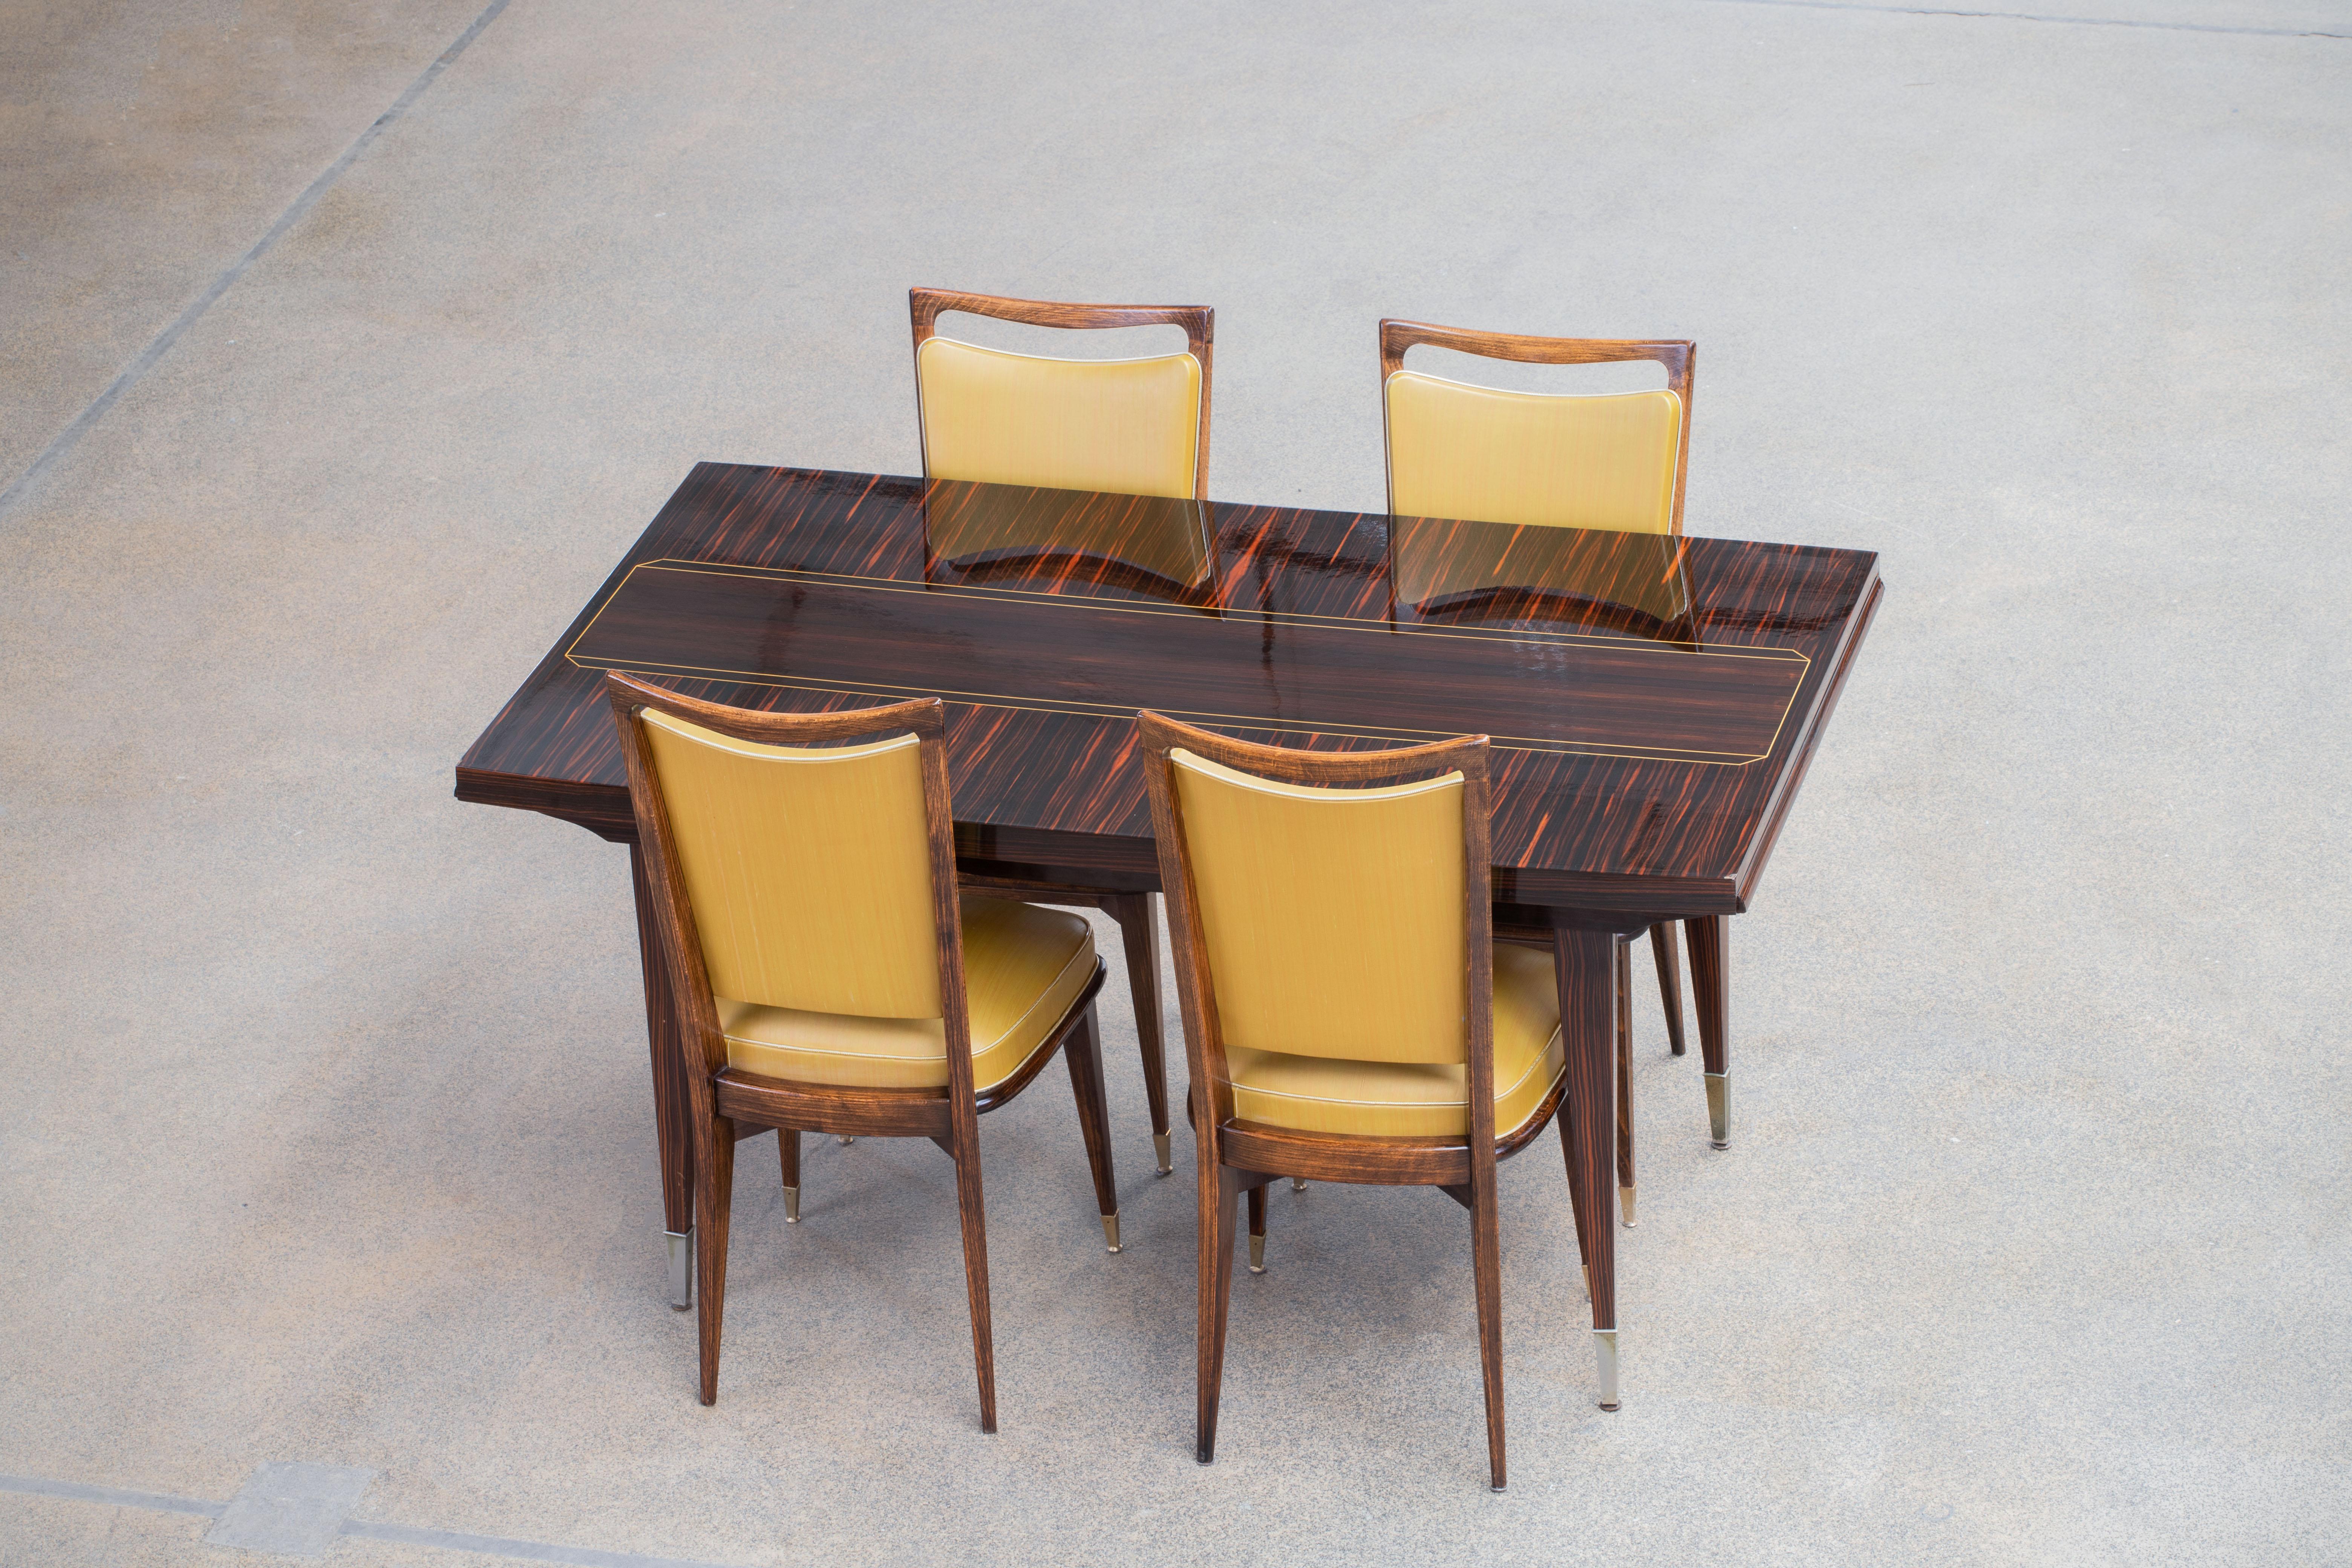 20th Century French Art Deco Brutalist Table, Macassar, 1940s For Sale